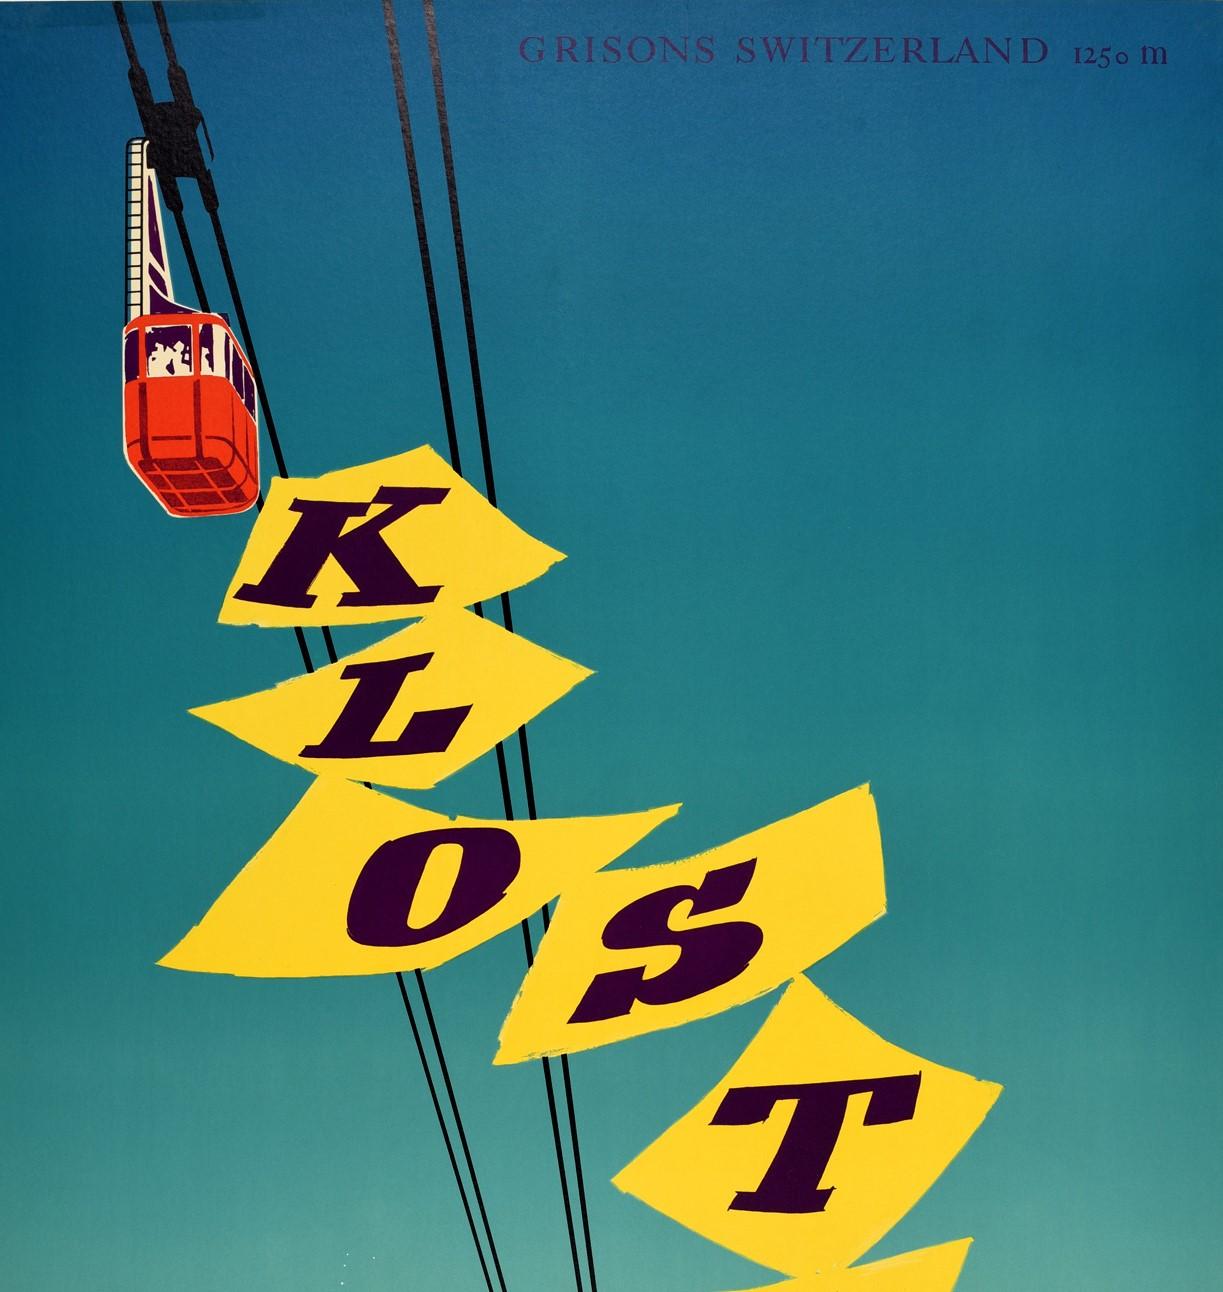 Original vintage poster promoting winter sports and skiing in the popular Swiss alpine resort of Klosters Grisons Switzerland 1250m featuring a great design by Donald Brun (1909-1999) depicting the word Klosters in stylised letters on yellow shapes